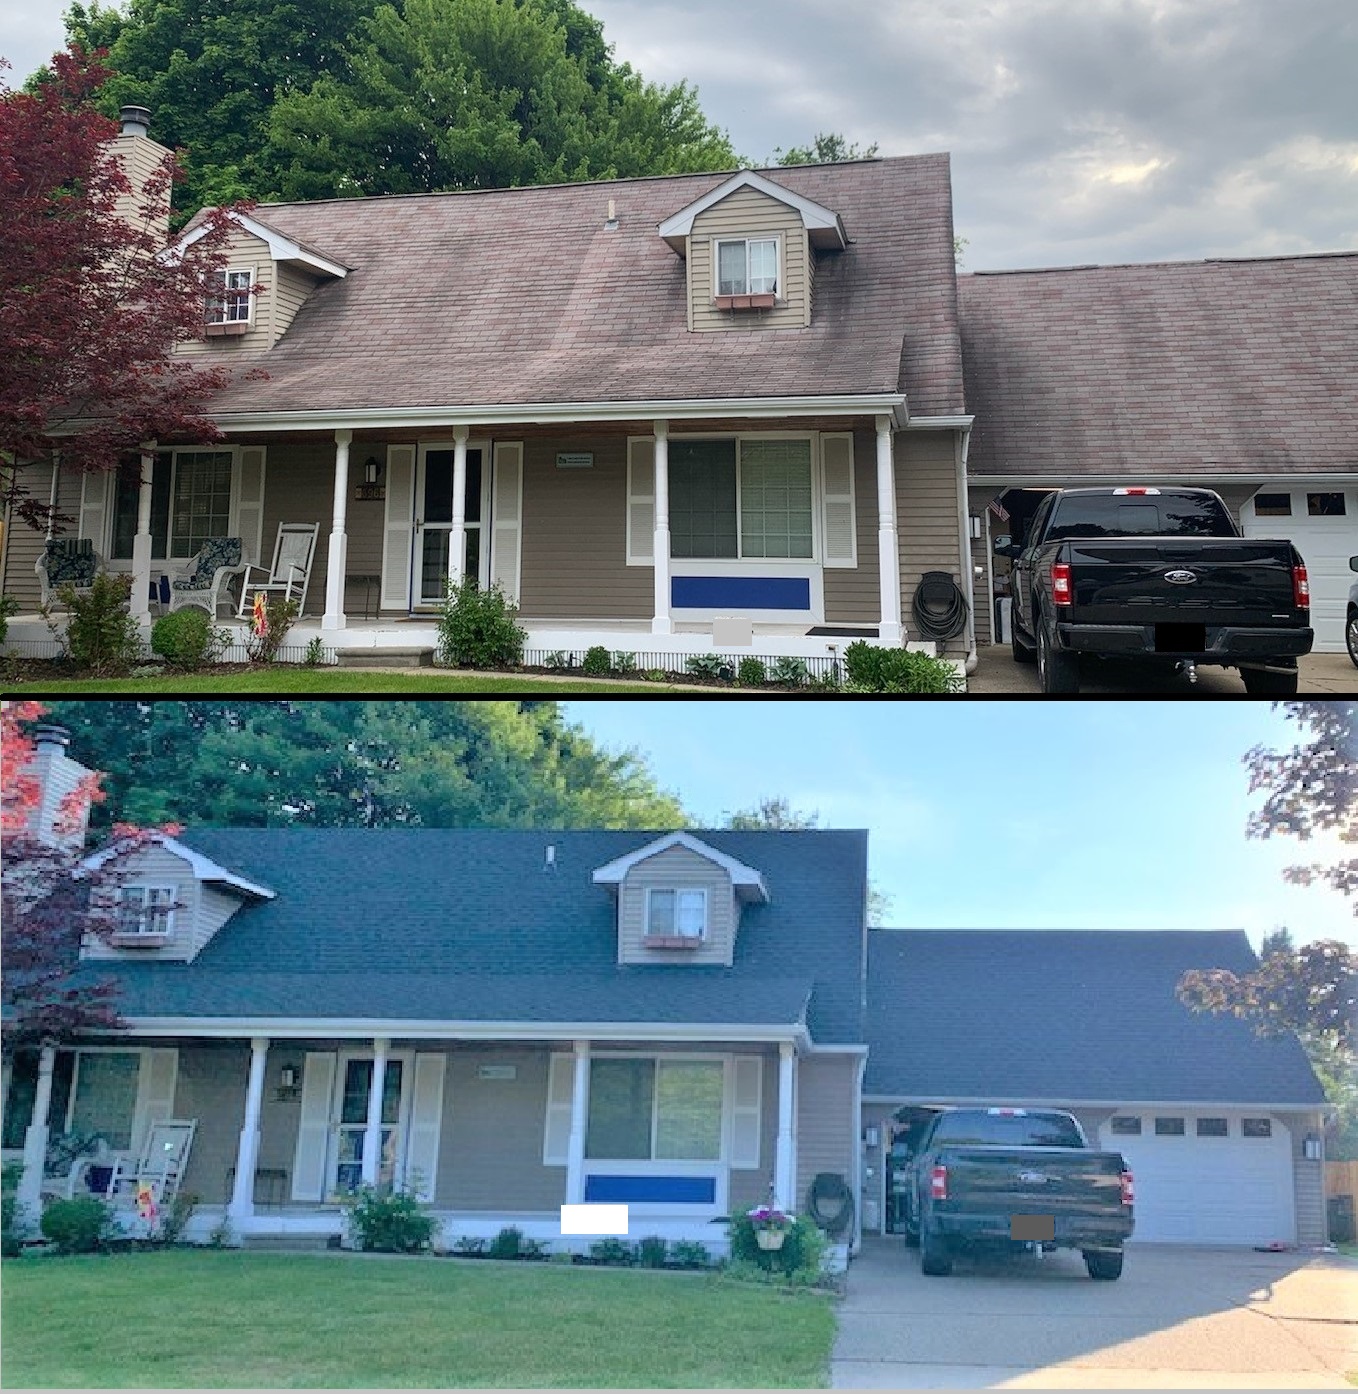 What a difference a new roof makes! Richards & Swift Roofing Troy (248)544-3908